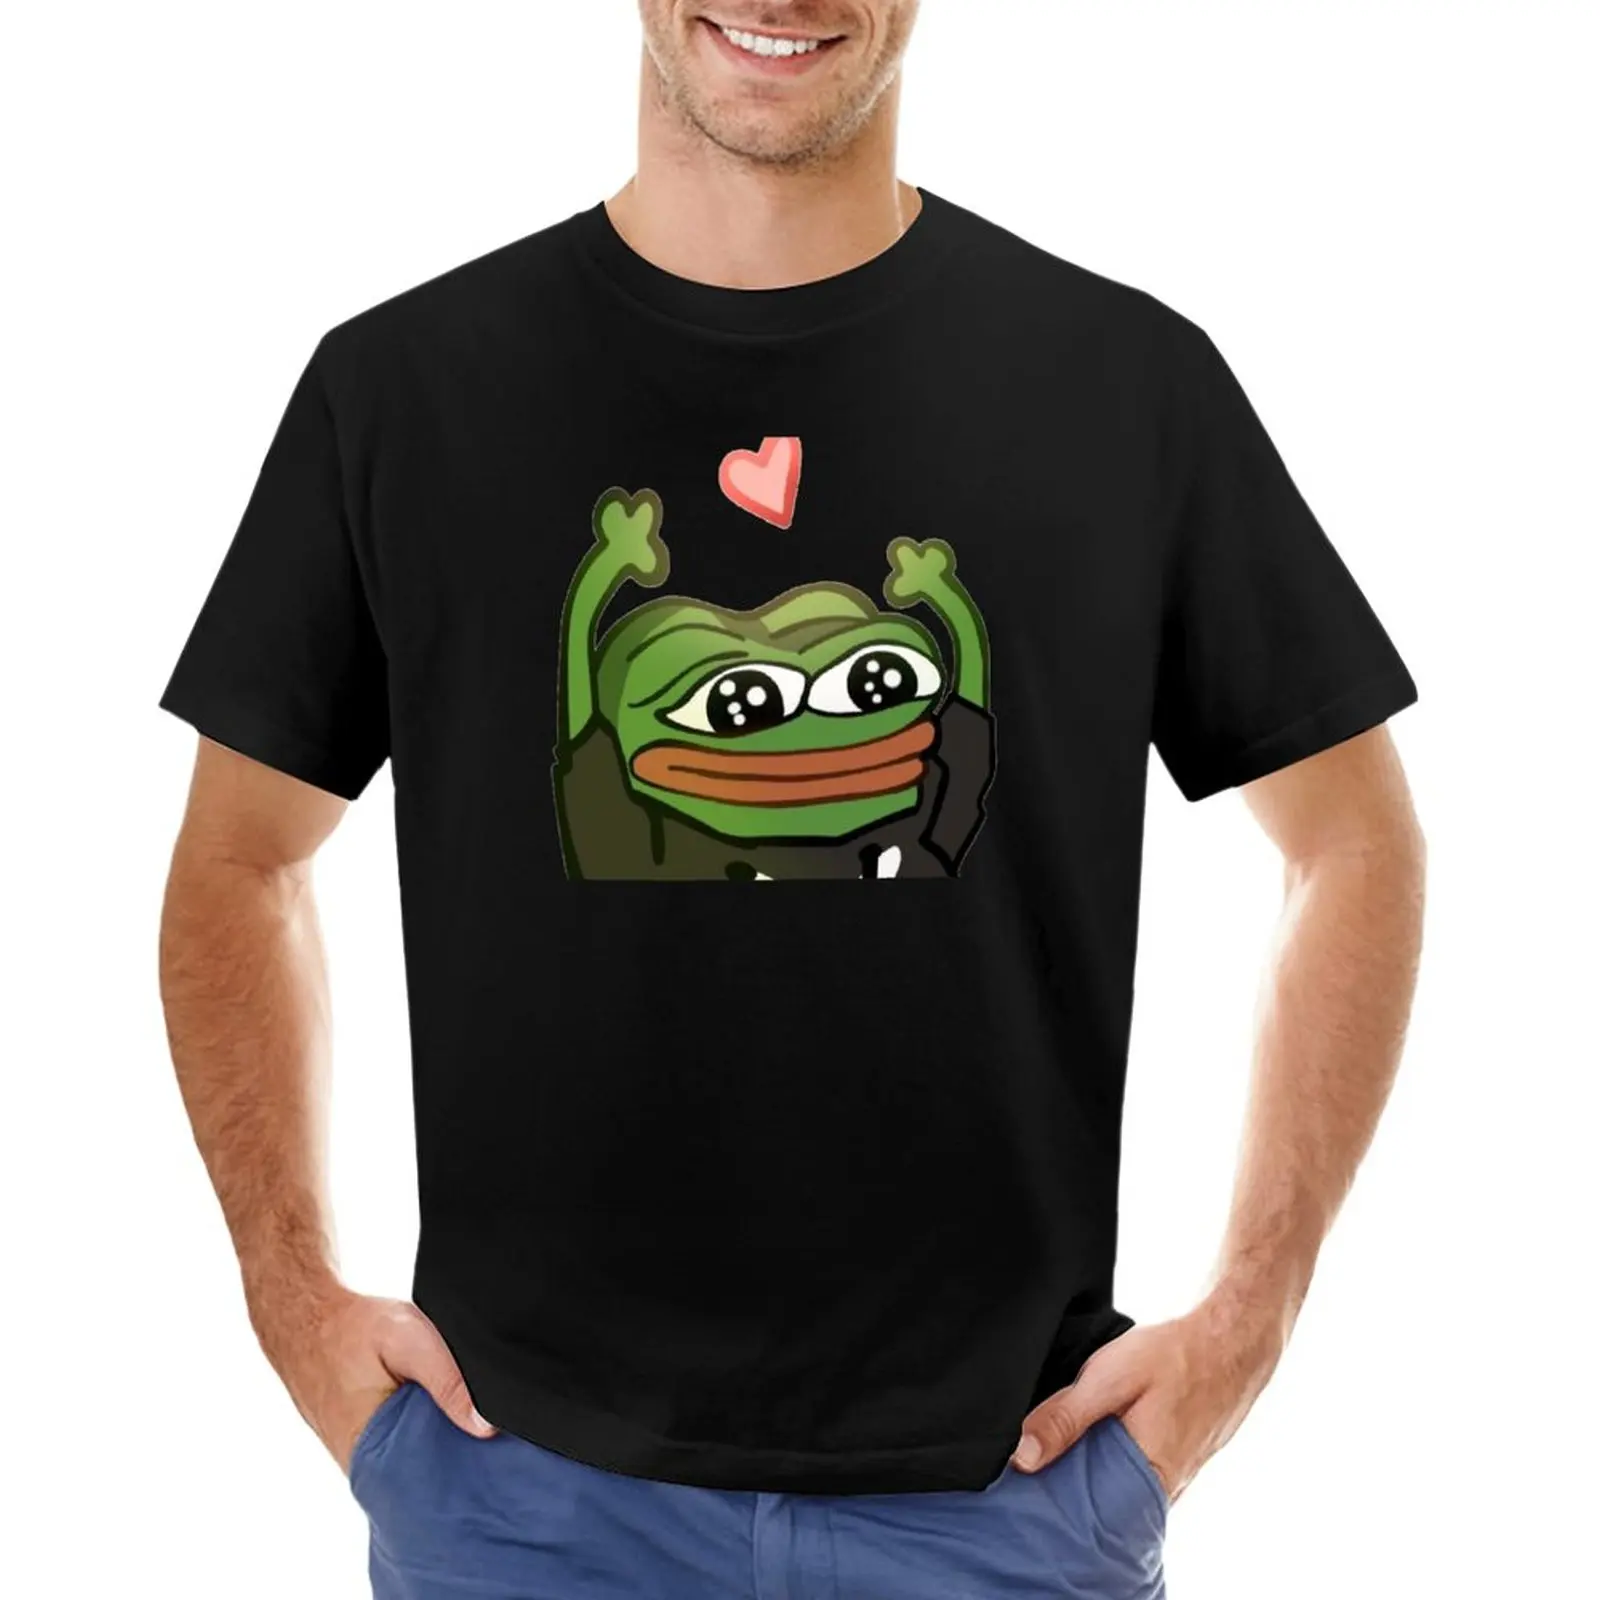 

Happy Valentines day Peepo with heart Pepe the Frog T-Shirt boys white t shirts sports fan t-shirts men clothes